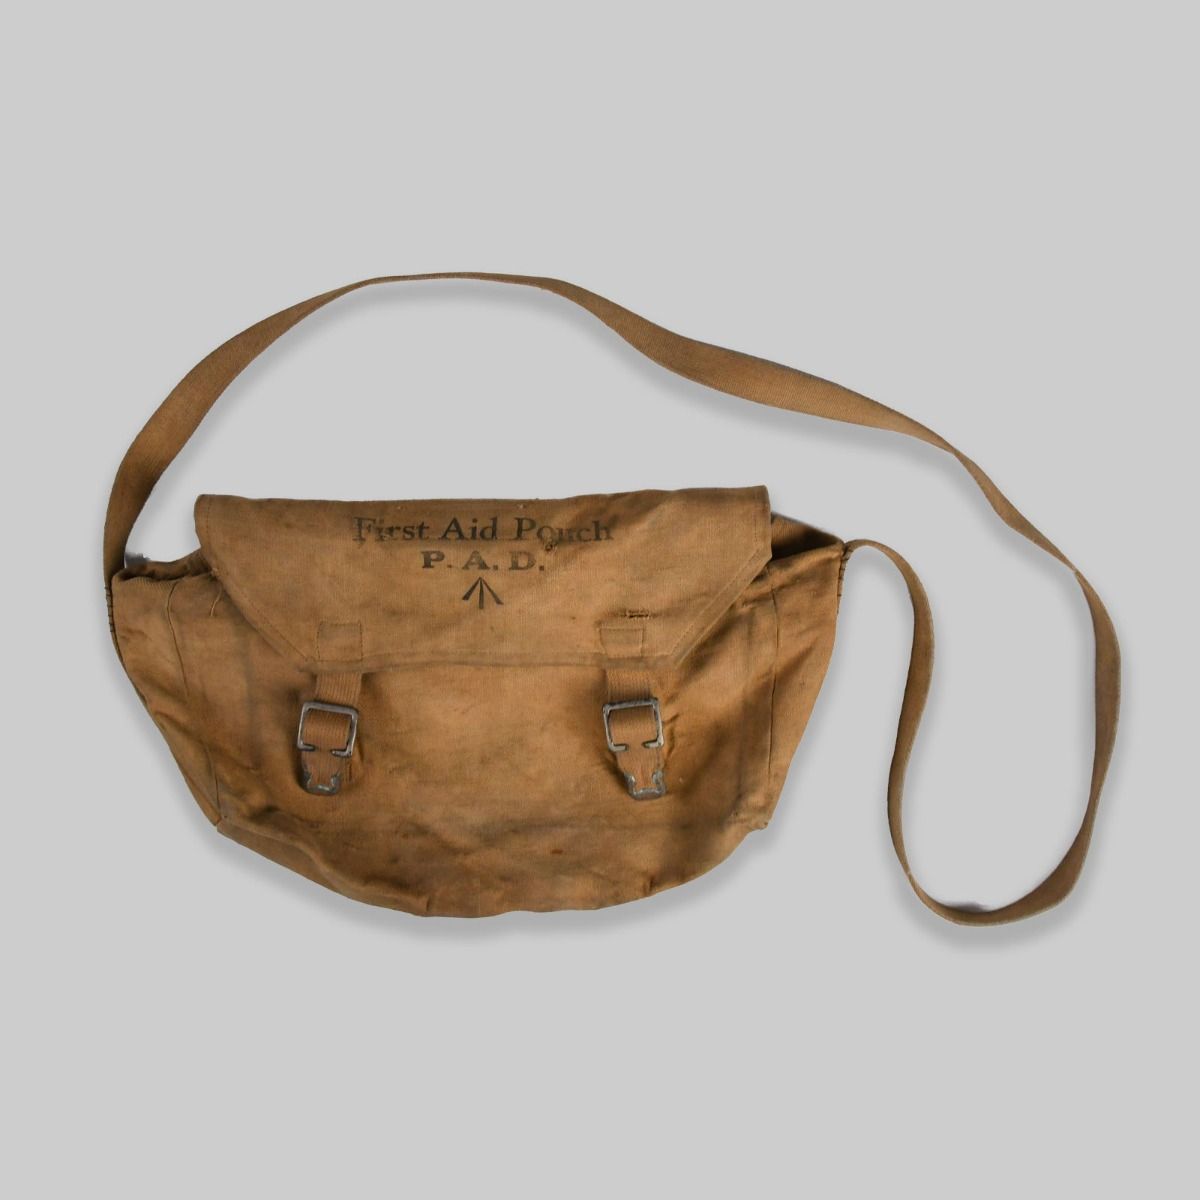 Vintage British Military First Aid Pouch P.A.D.